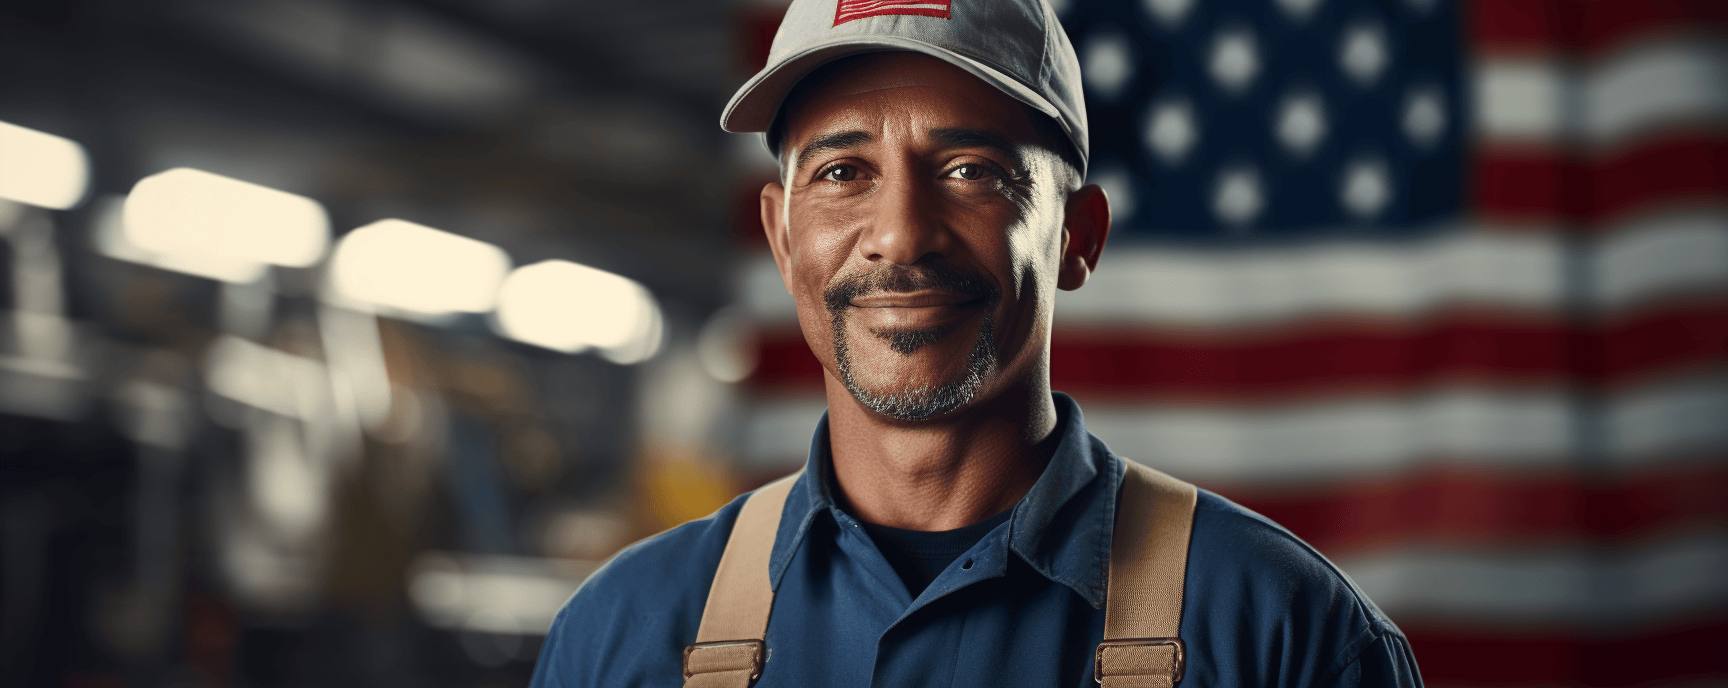 Blue collar worker standing in front of American flag